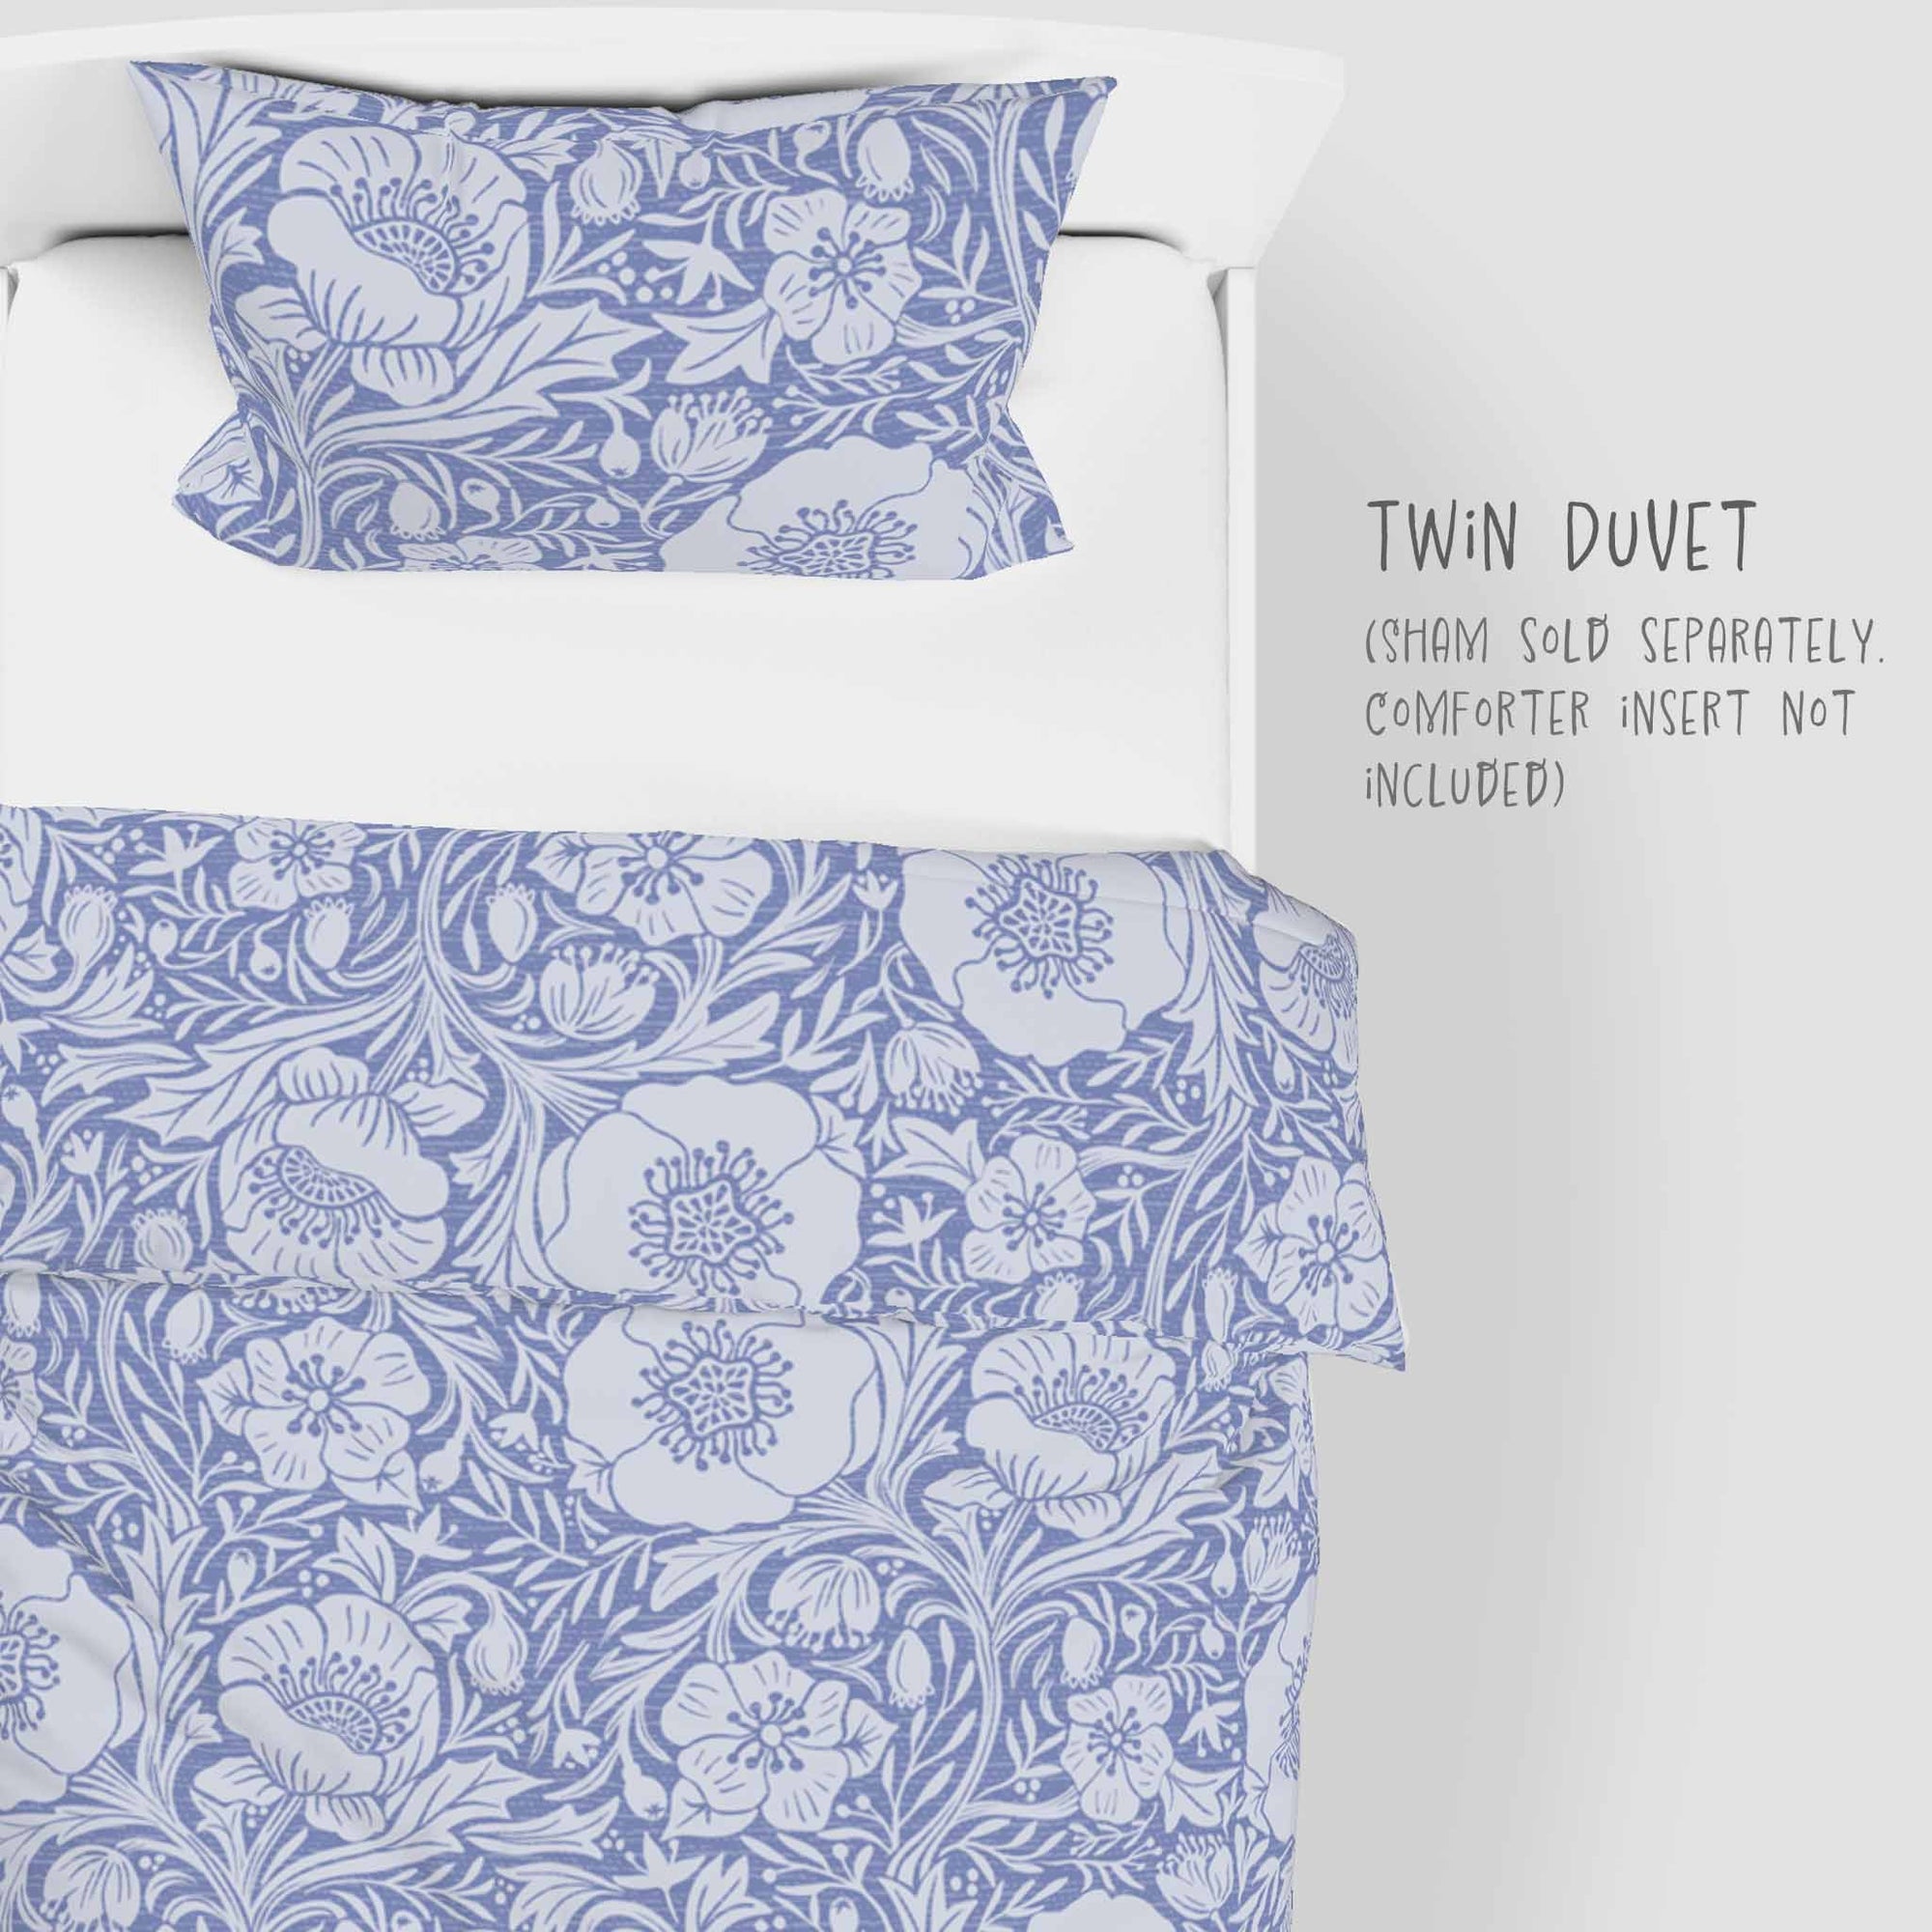 Poppies on blue background 100% Cotton Duvet Cover: Twin and Twin XL sizes.